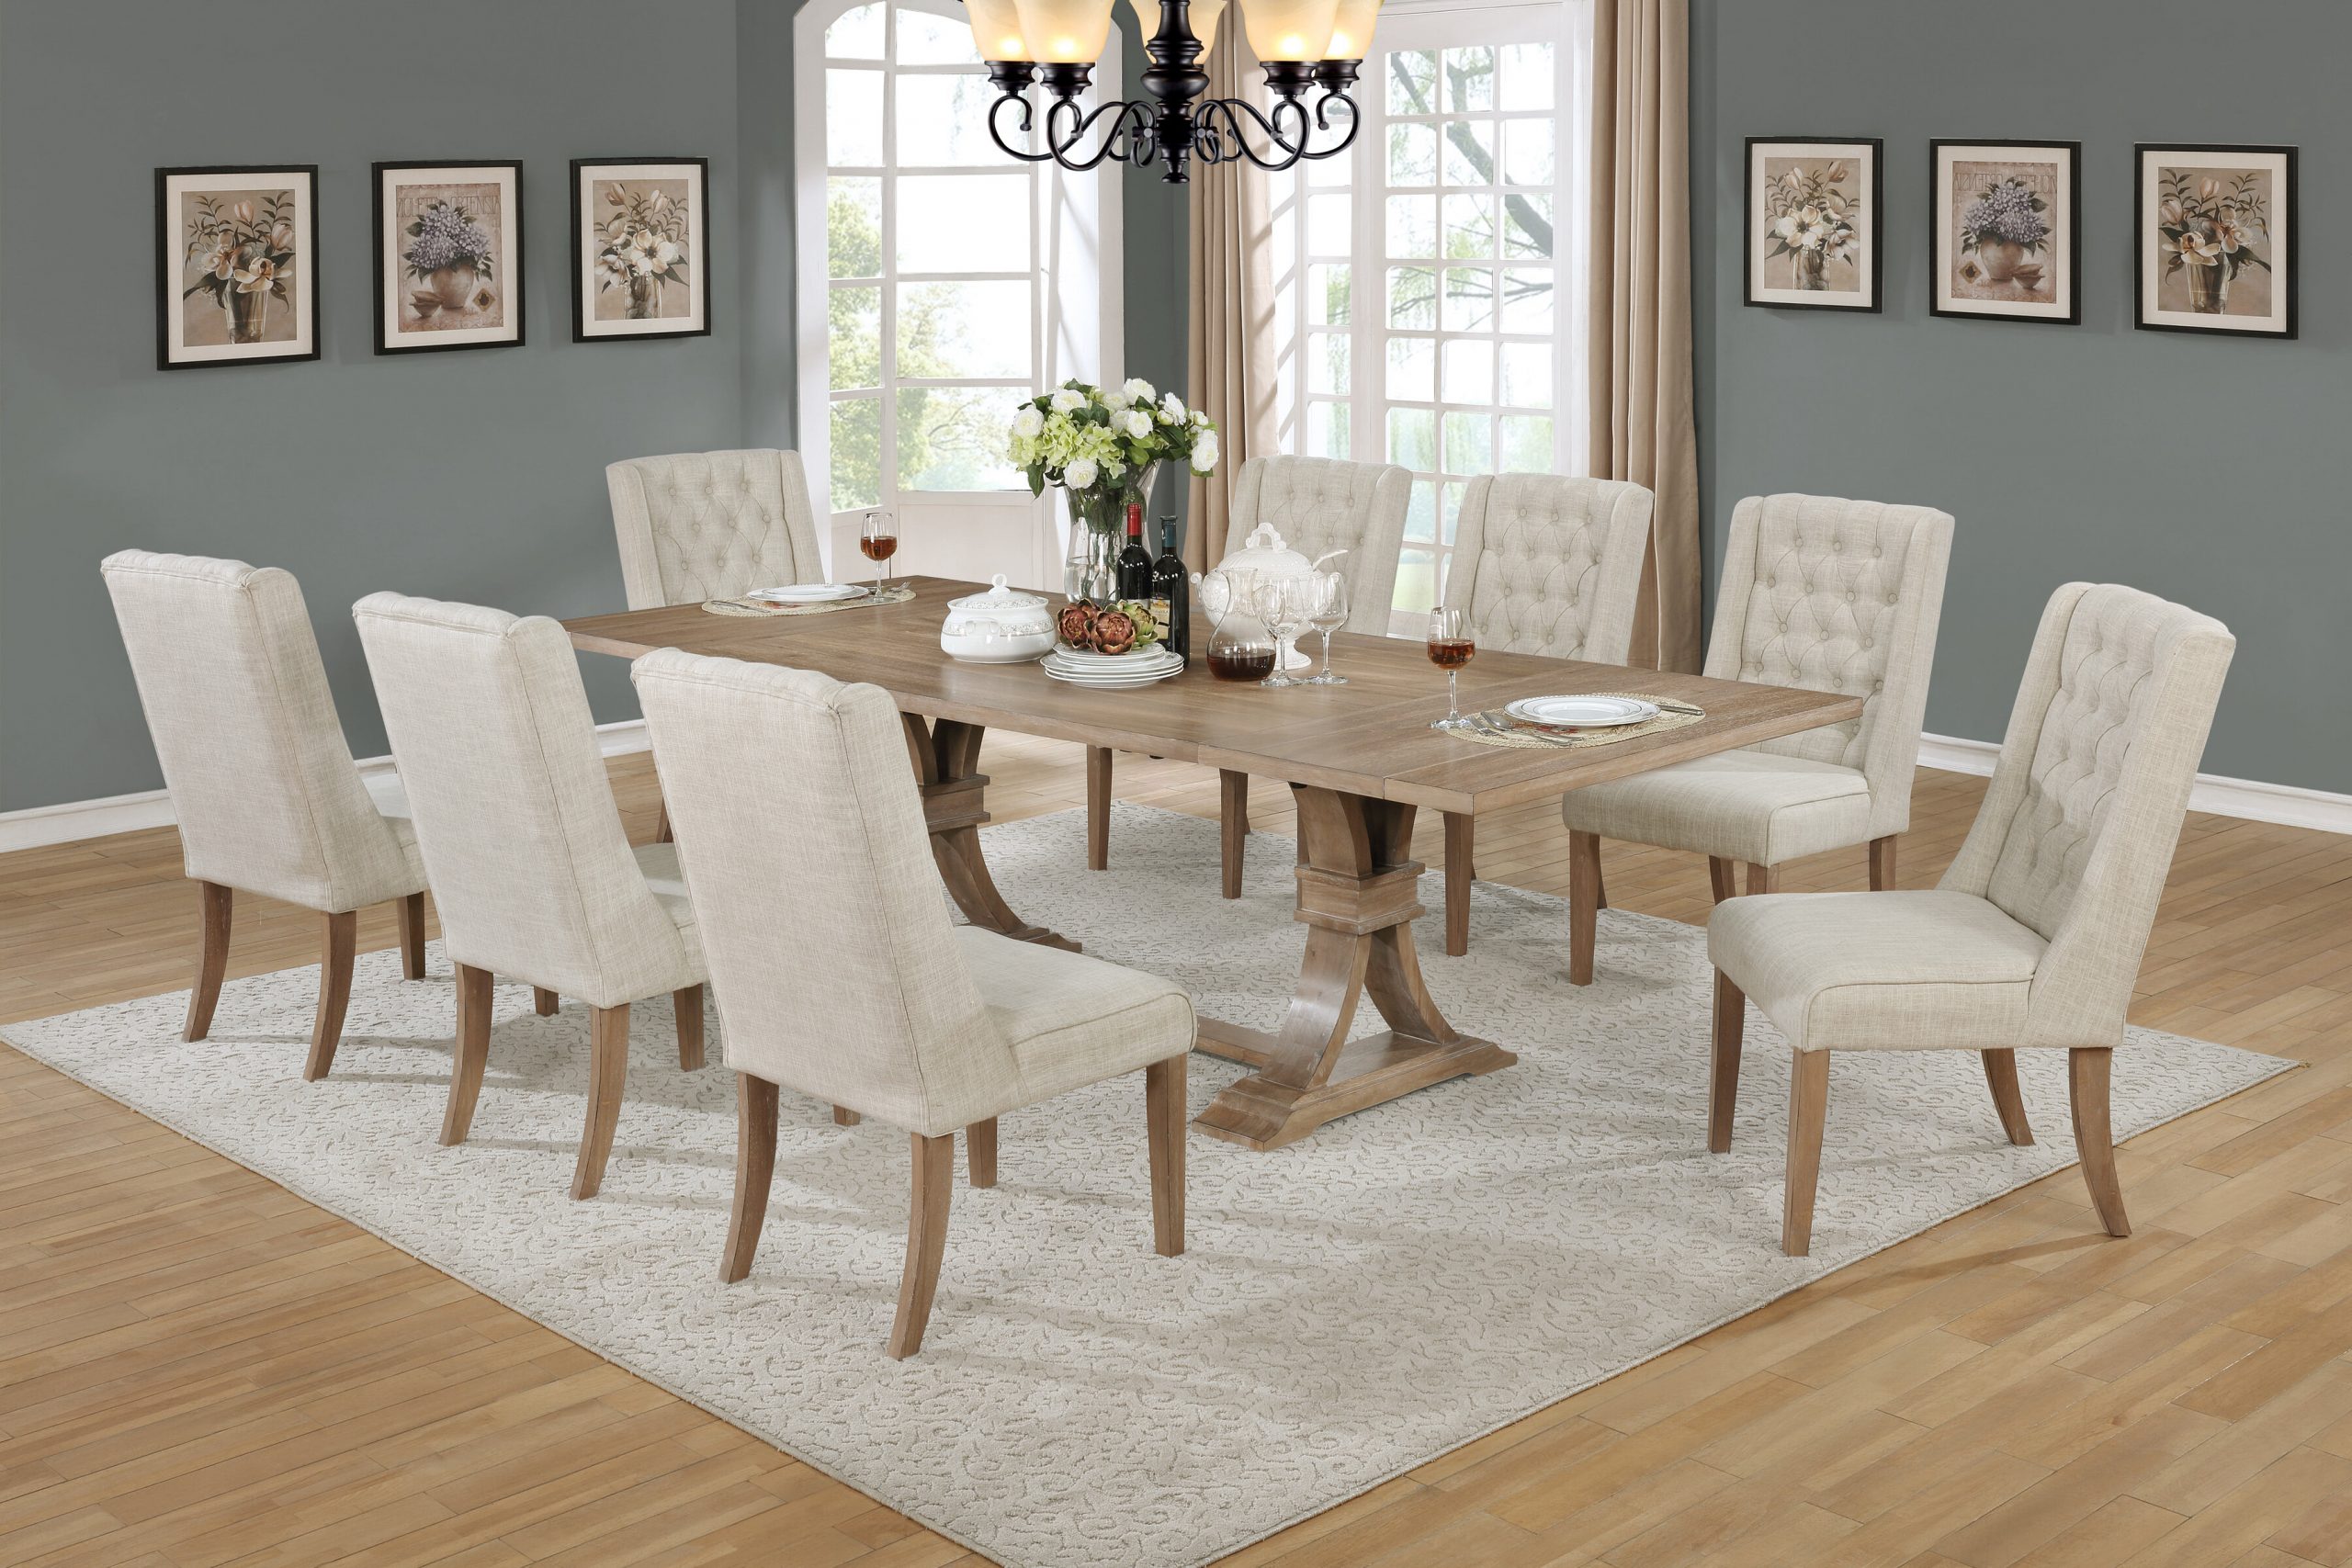 Denville 9 Piece Dining Set with regard to dimensions 3600 X 2400